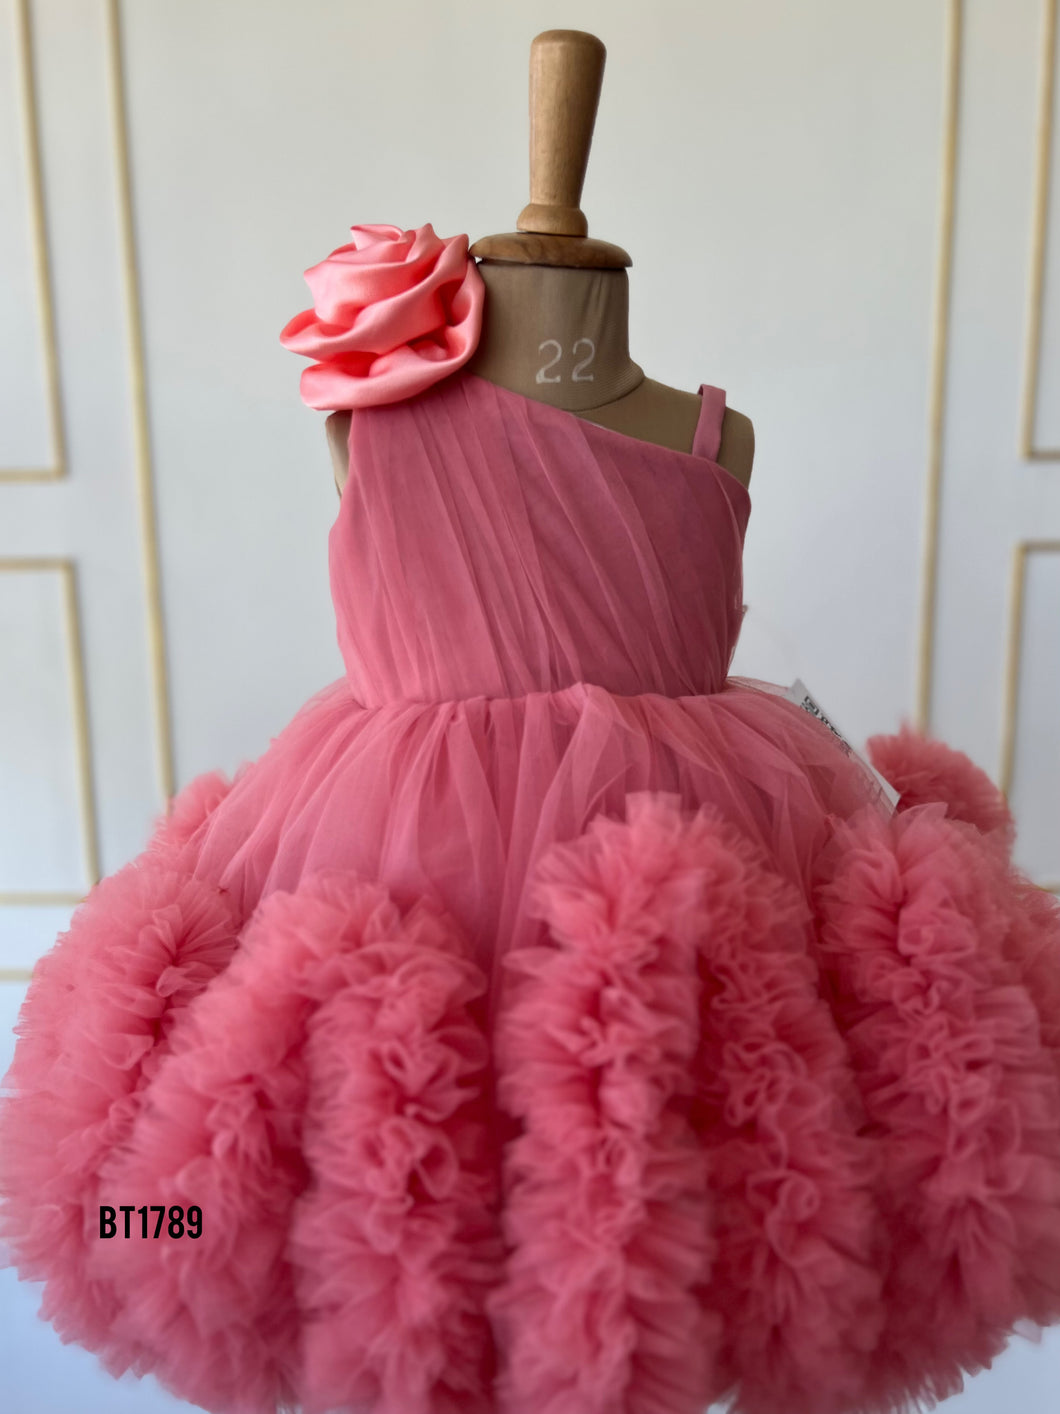 BT1789 Enchanted Rose – One-Shoulder Baby Party Dress